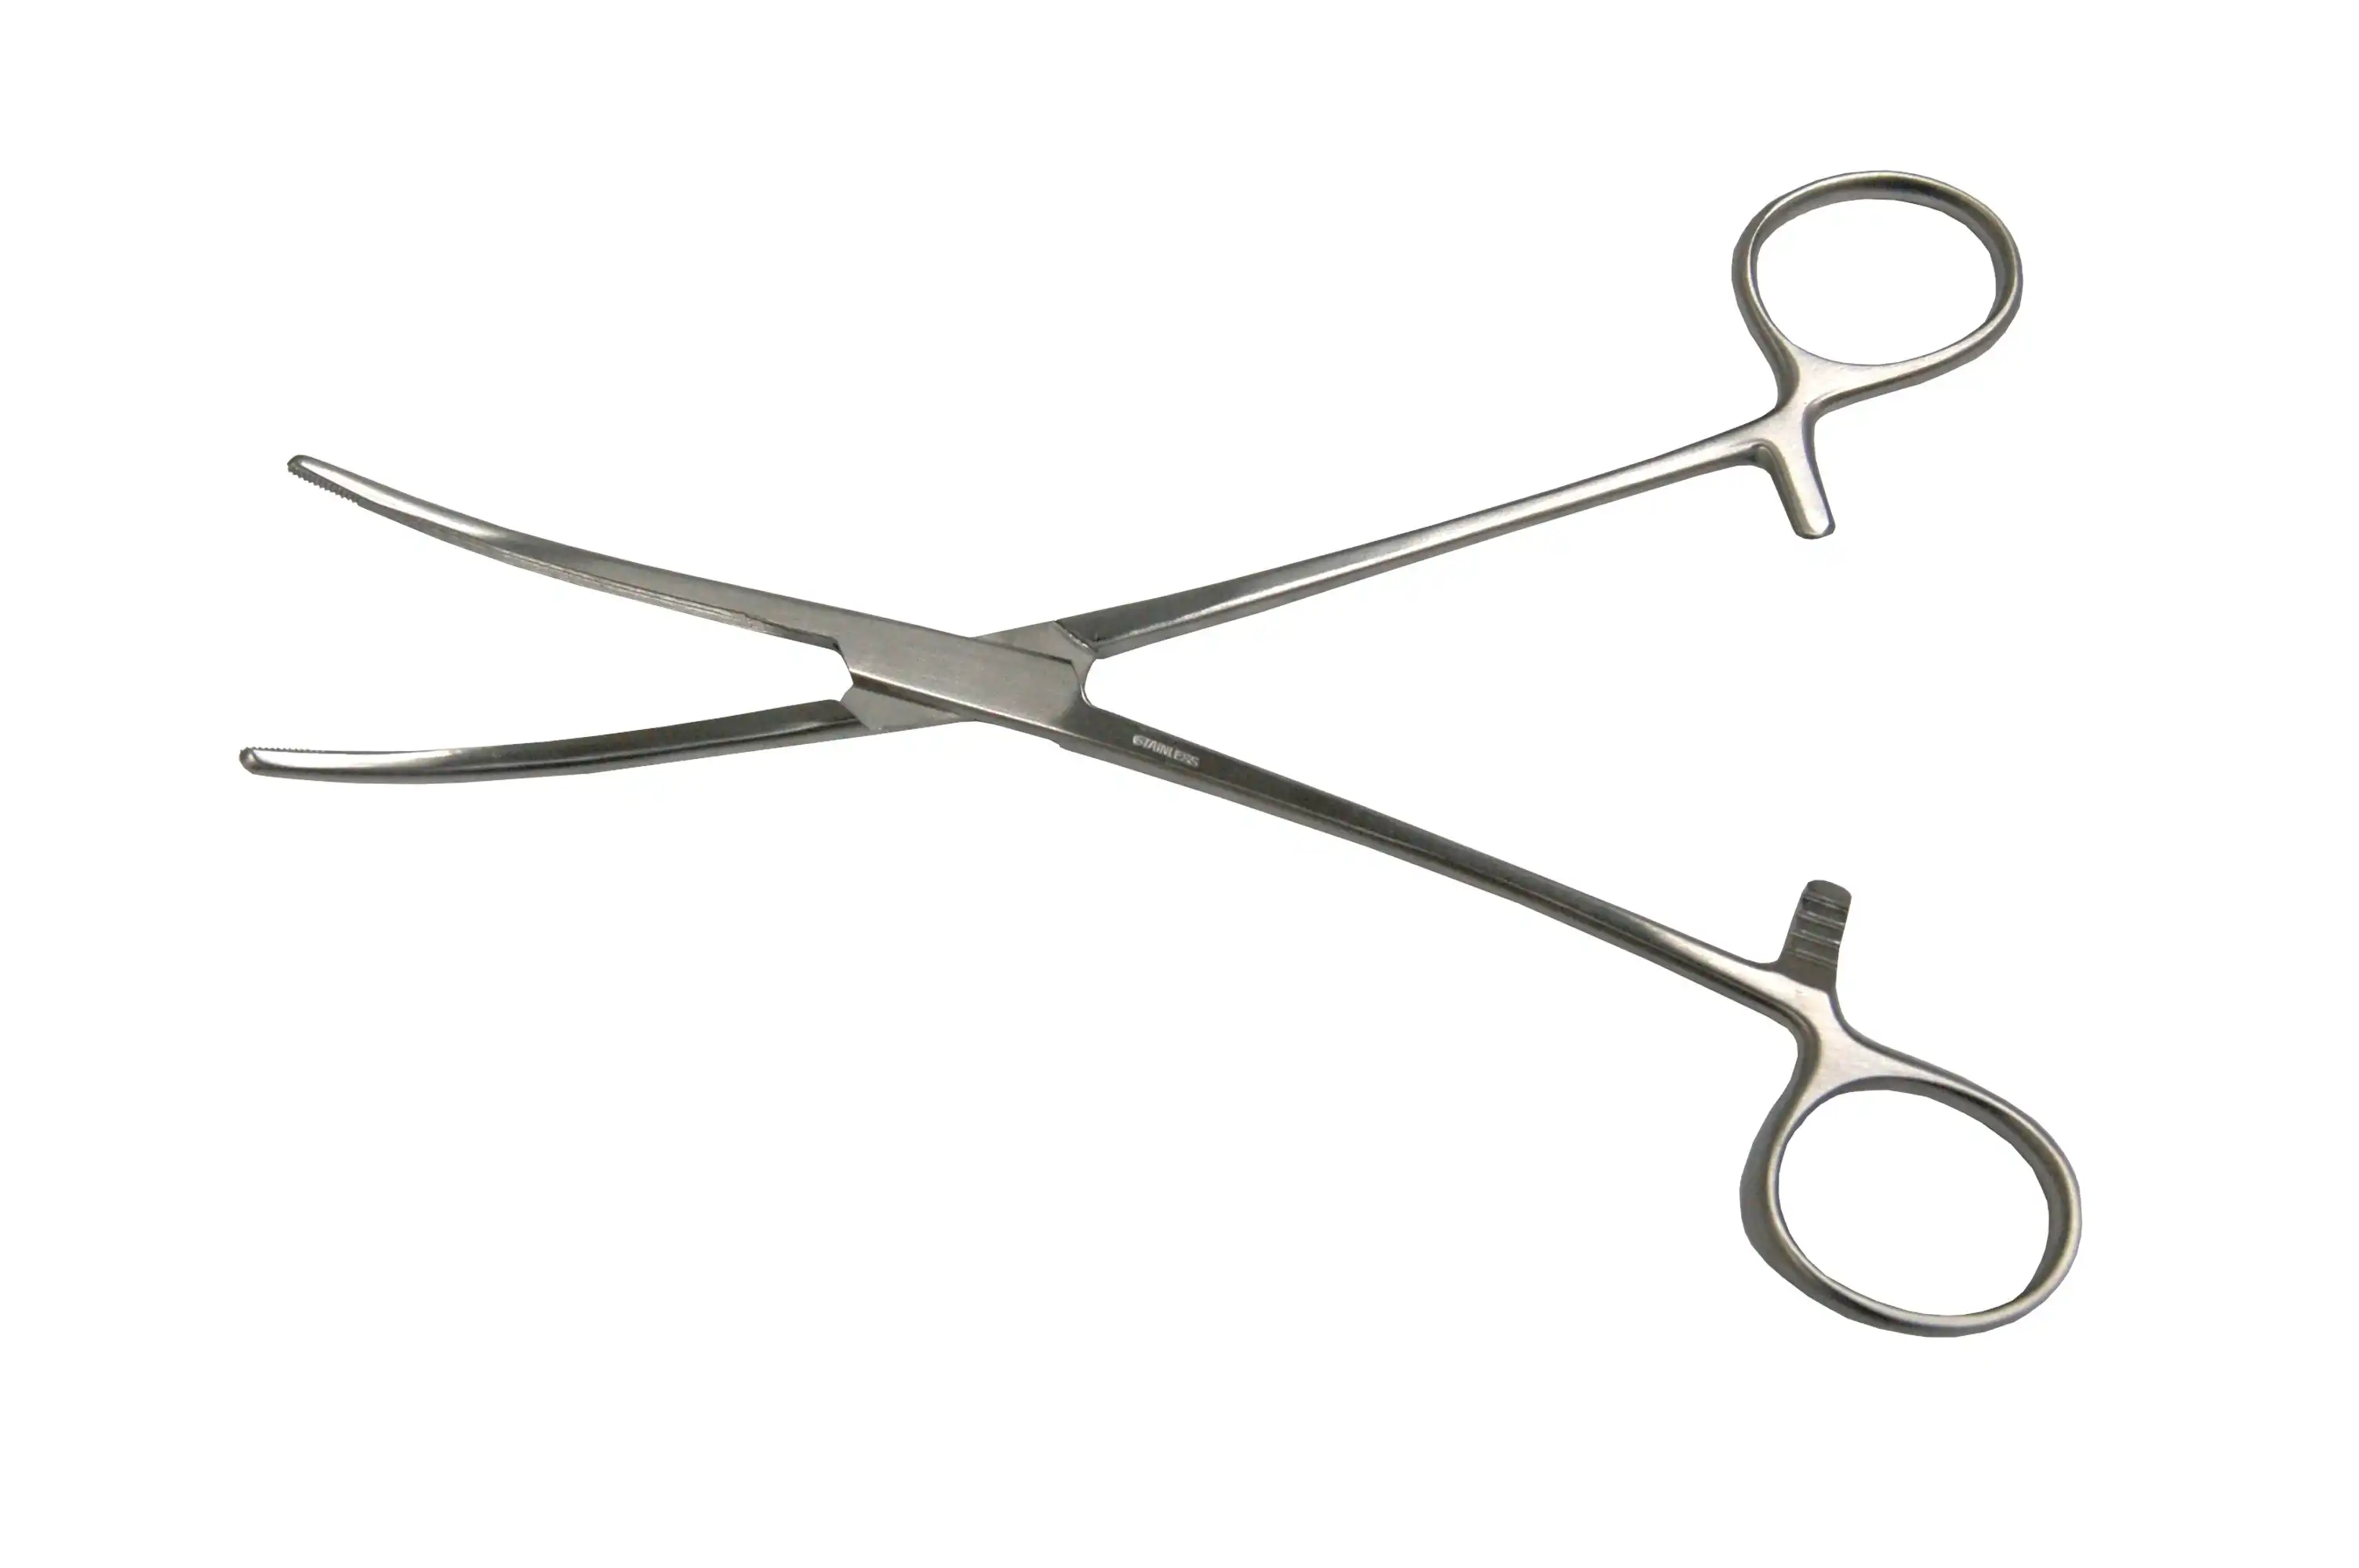 Perfect Rochester Carmalt Haemostatic Artery Forceps 20cm Curved Stainless Steel Theatre Quality